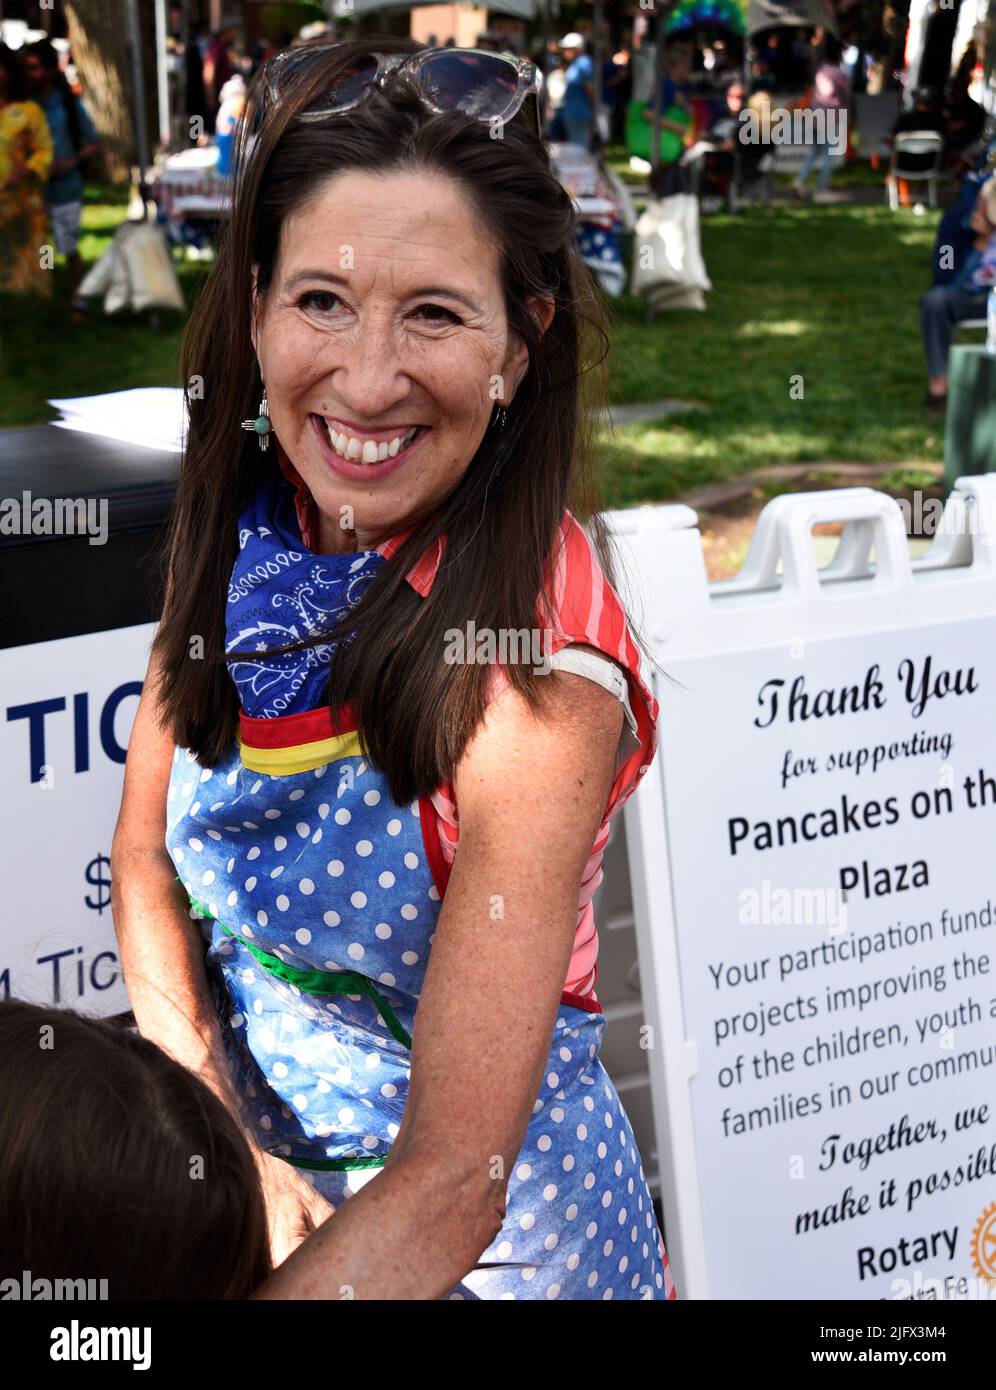 Teresa Leger Fernandez, a member of the U.S. House of Representatives  representing New Mexico's 3rd congressional district, at a Fourth of July  event Stock Photo - Alamy